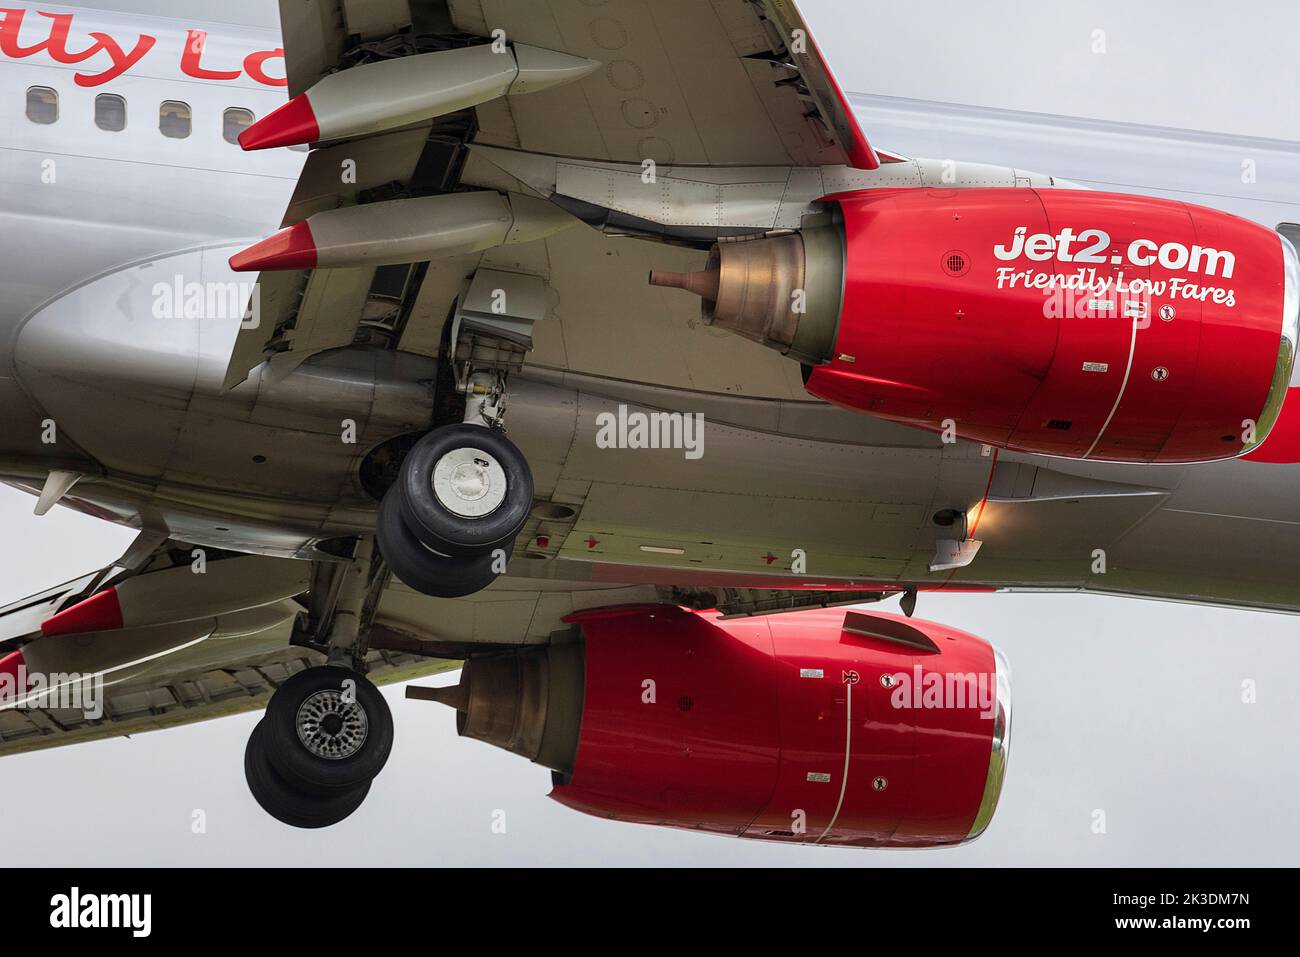 Jet2 Boeing 737 in the air landing with wheels down. Stock Photo